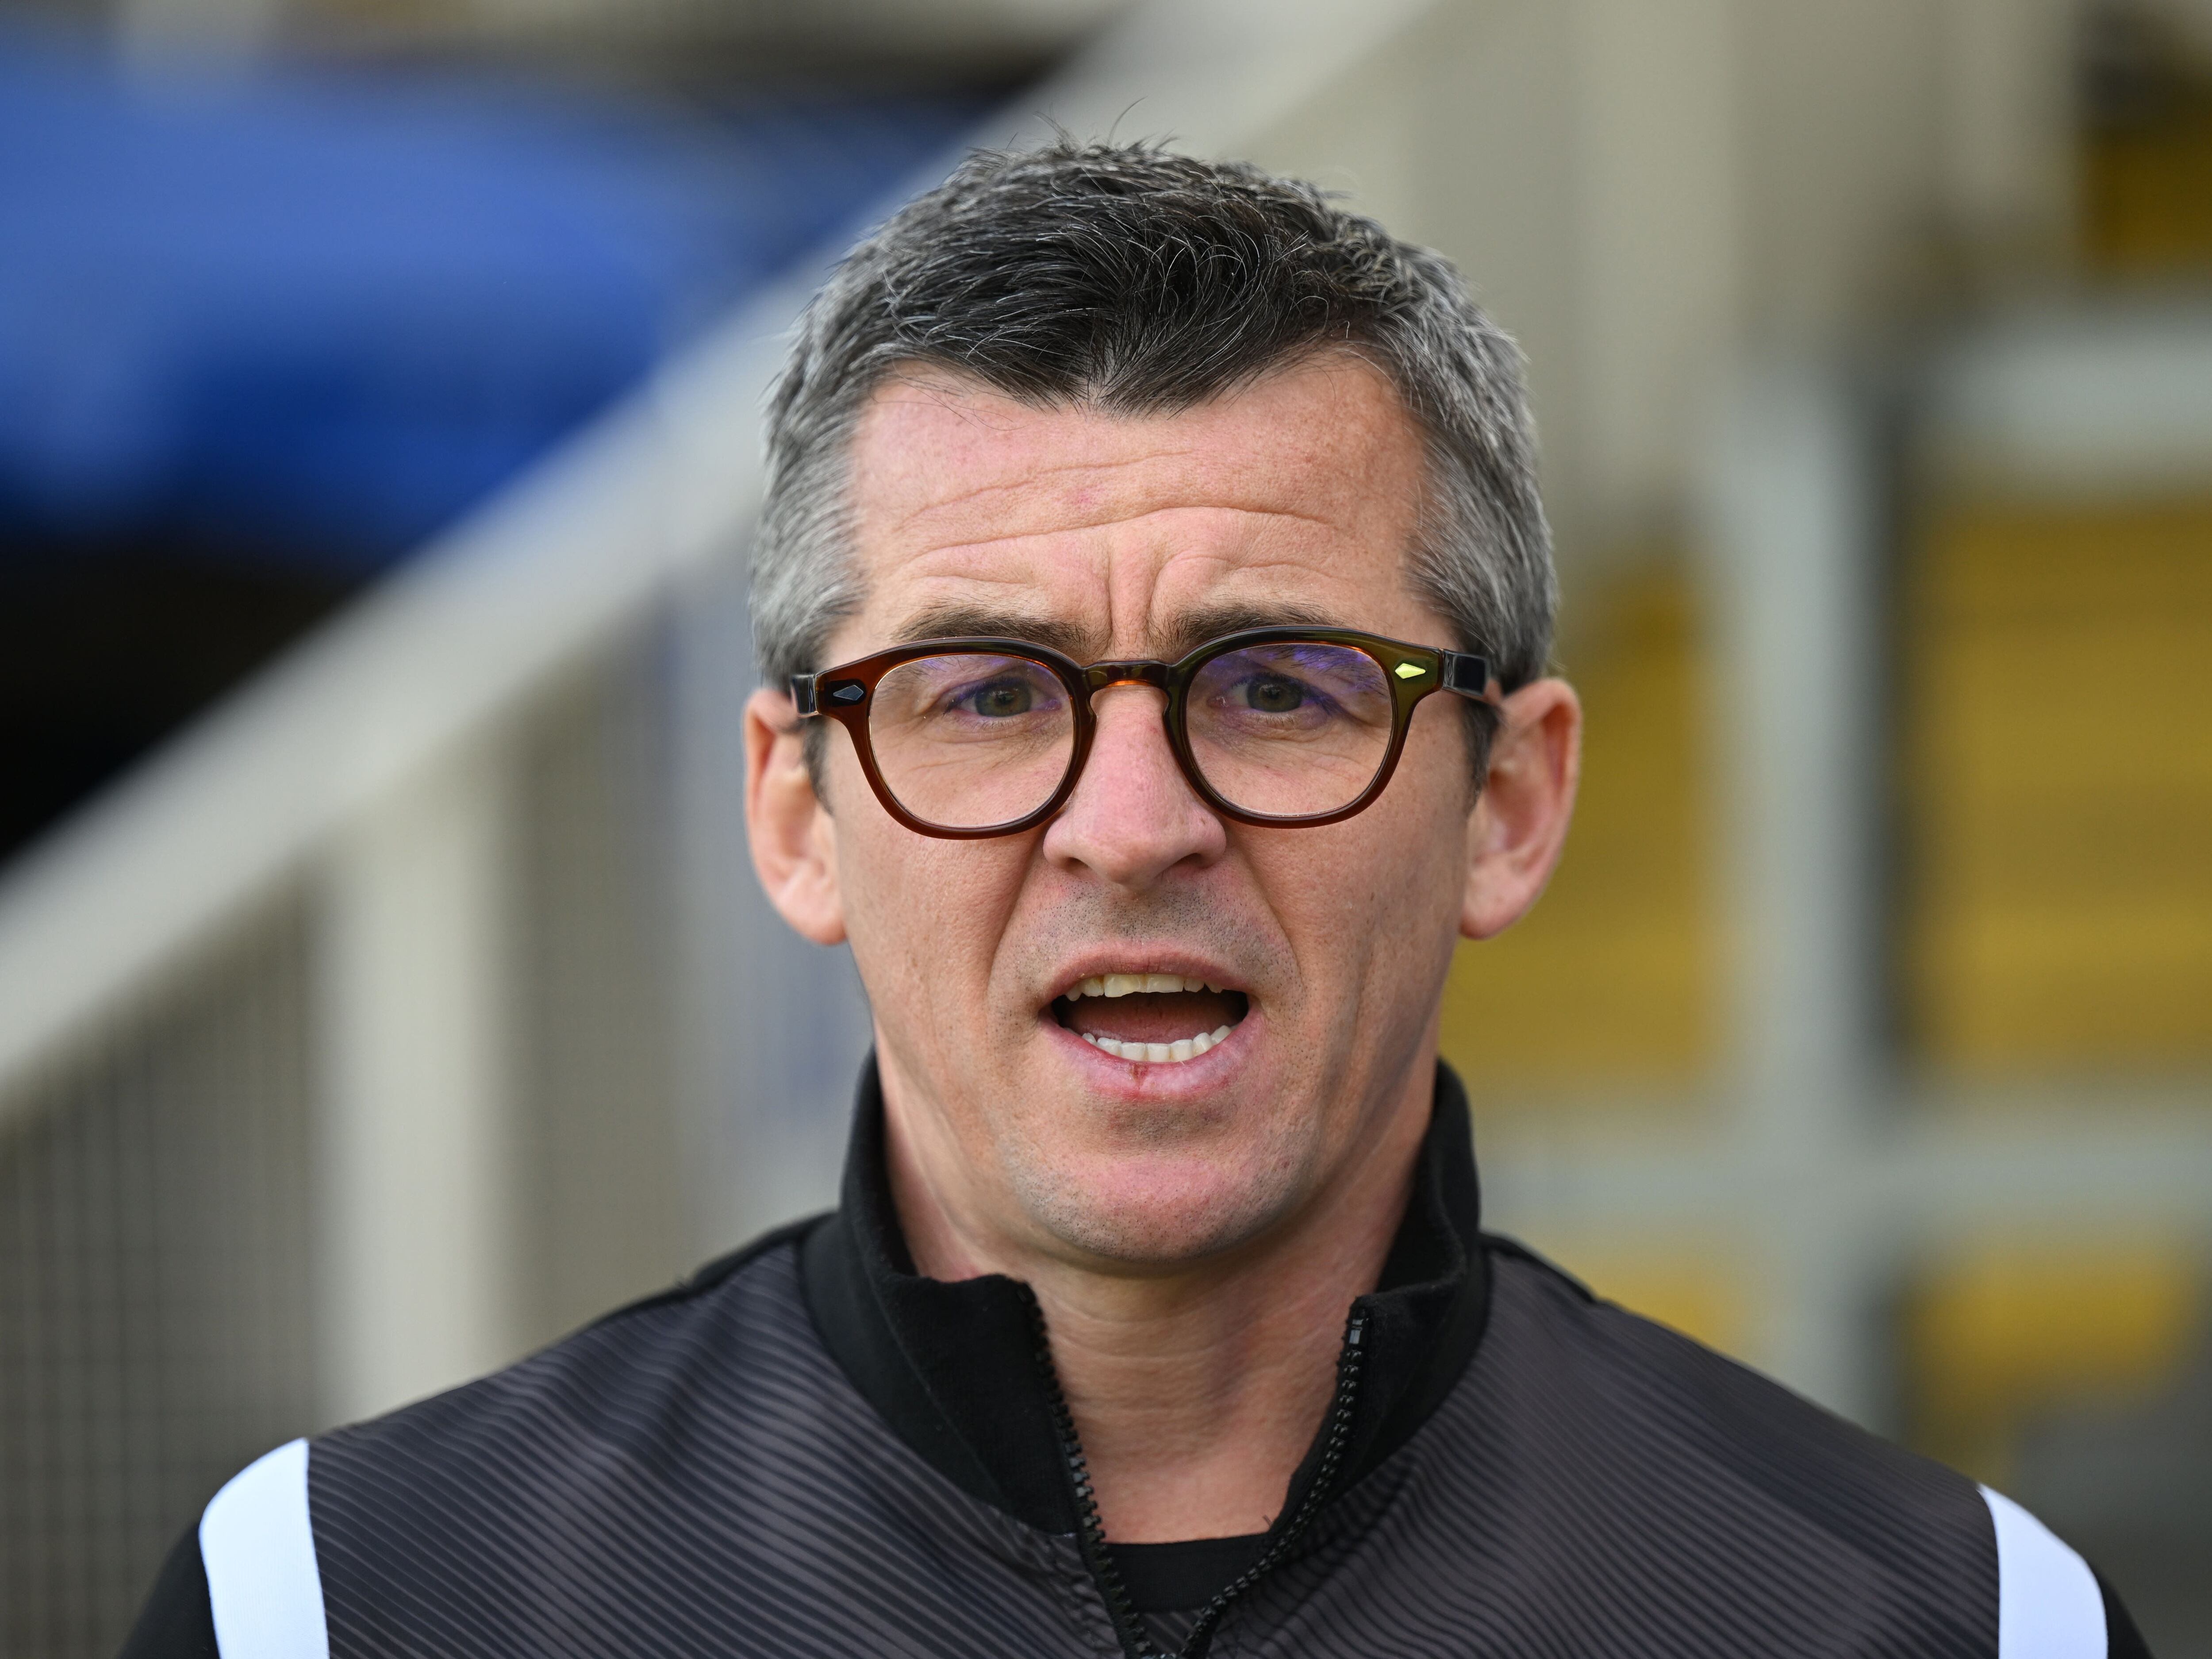 Joey Barton to pay Jeremy Vine £75,000 to settle High Court libel claim